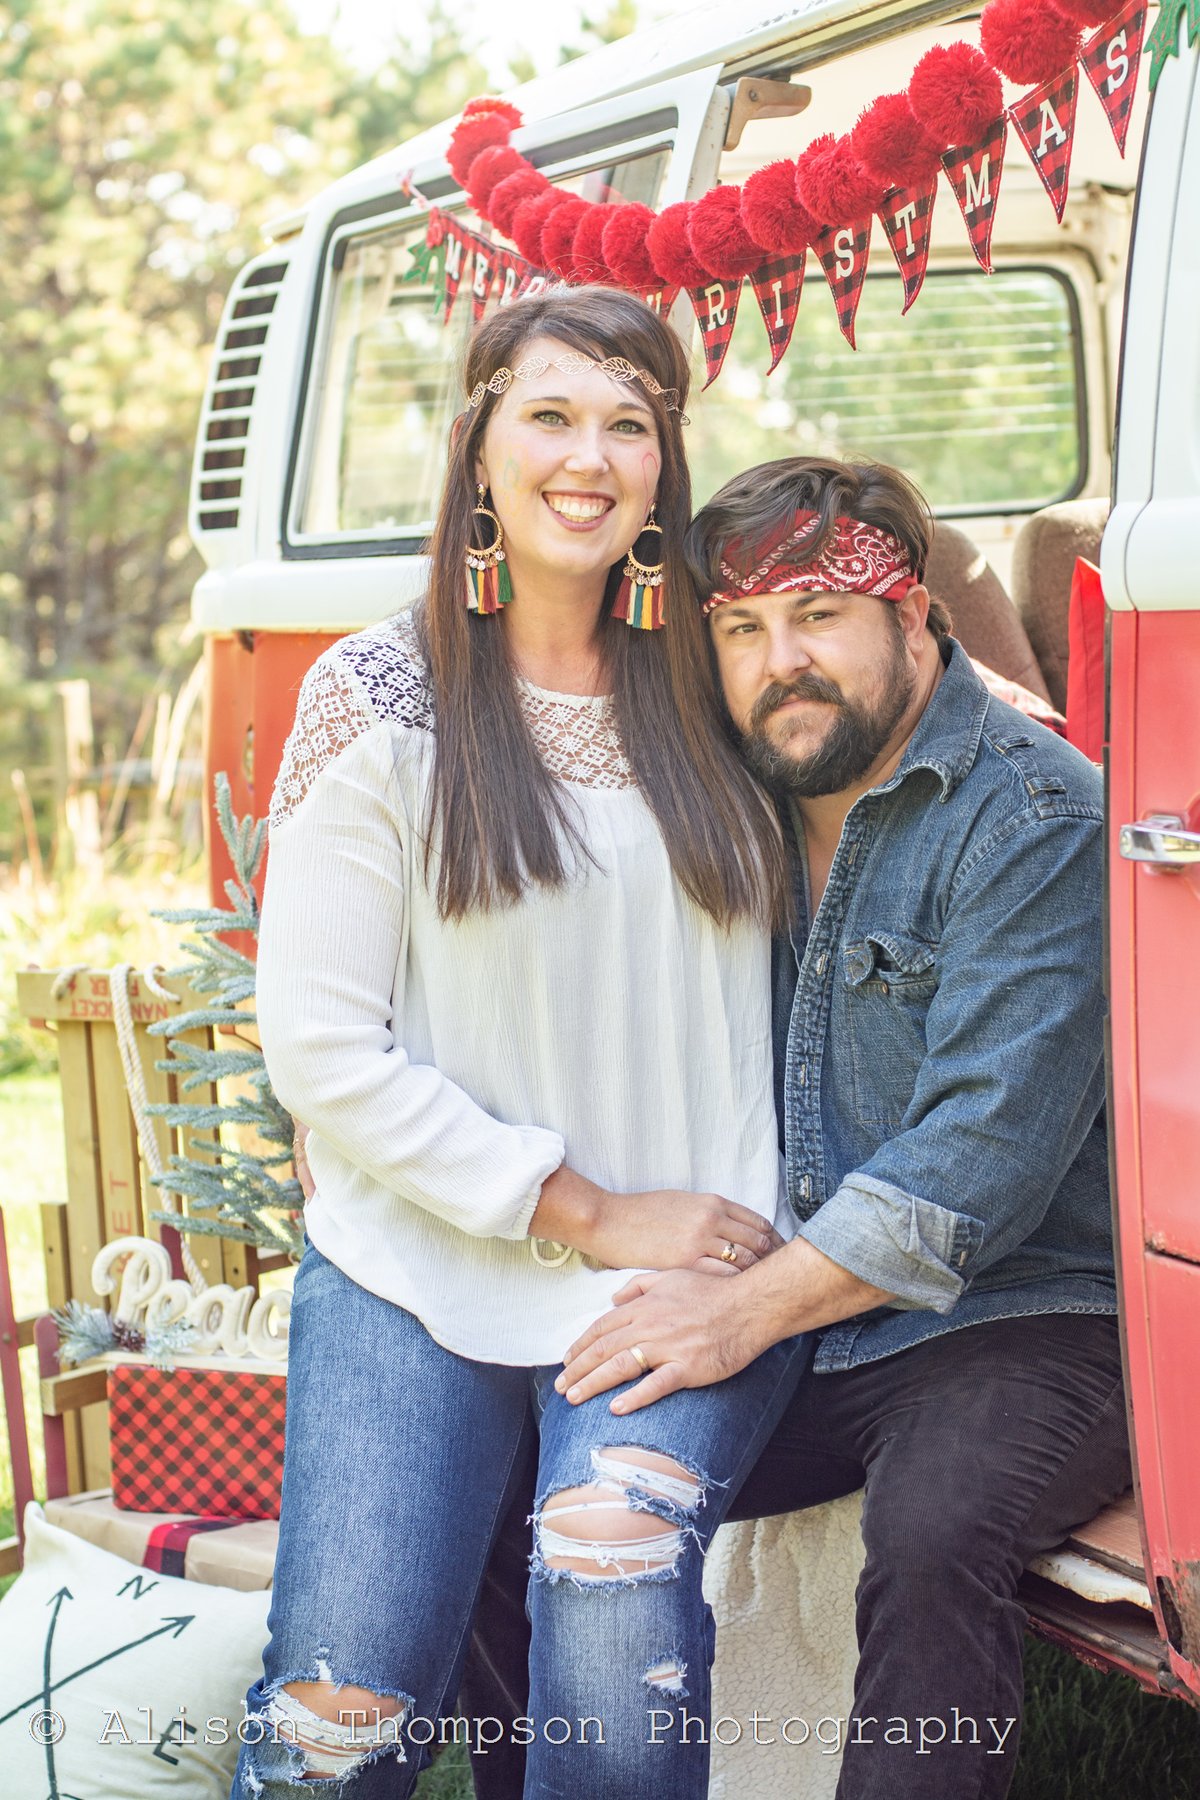 Image of VW Bus Christmas Mini Sessions - 12/8 OR 12/11 - 20 minutes - 10 images - $175